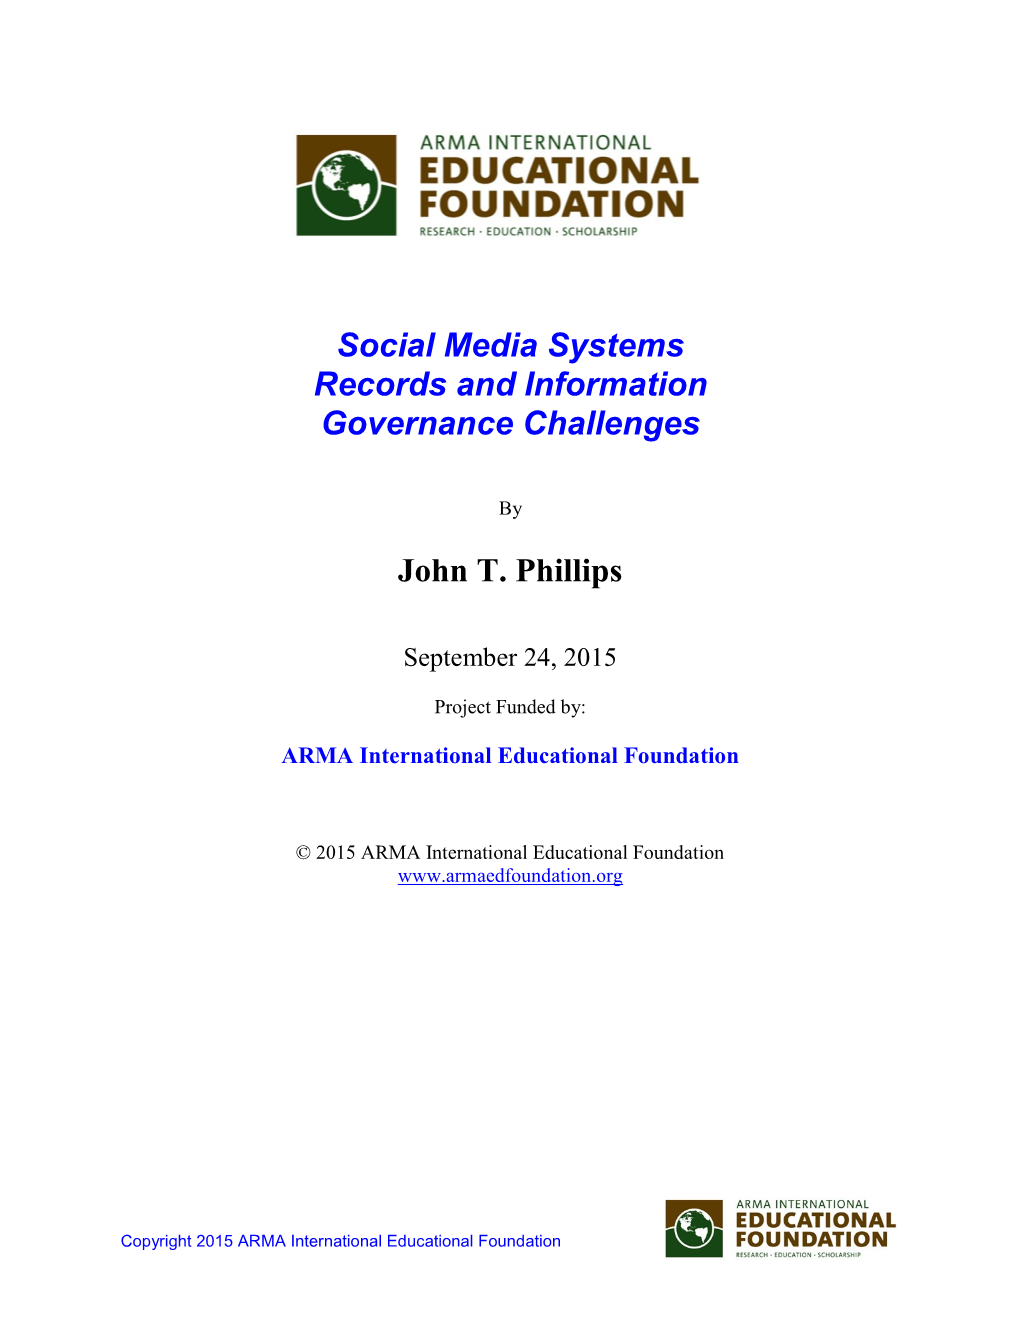 Social Media Systems Records and Information Governance Challenges